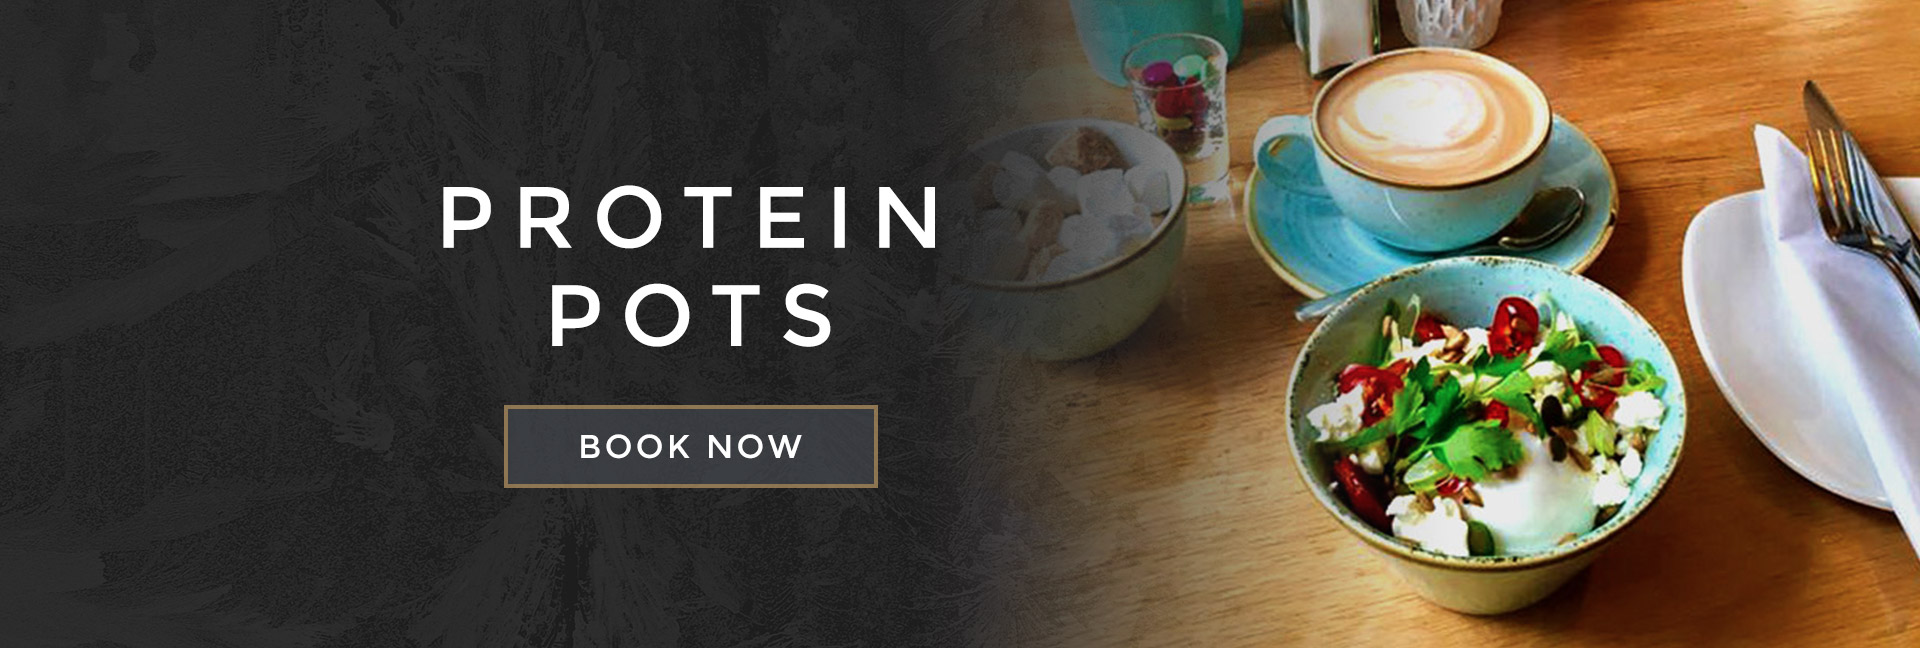 Protein pots at All Bar One Chester - Book your table